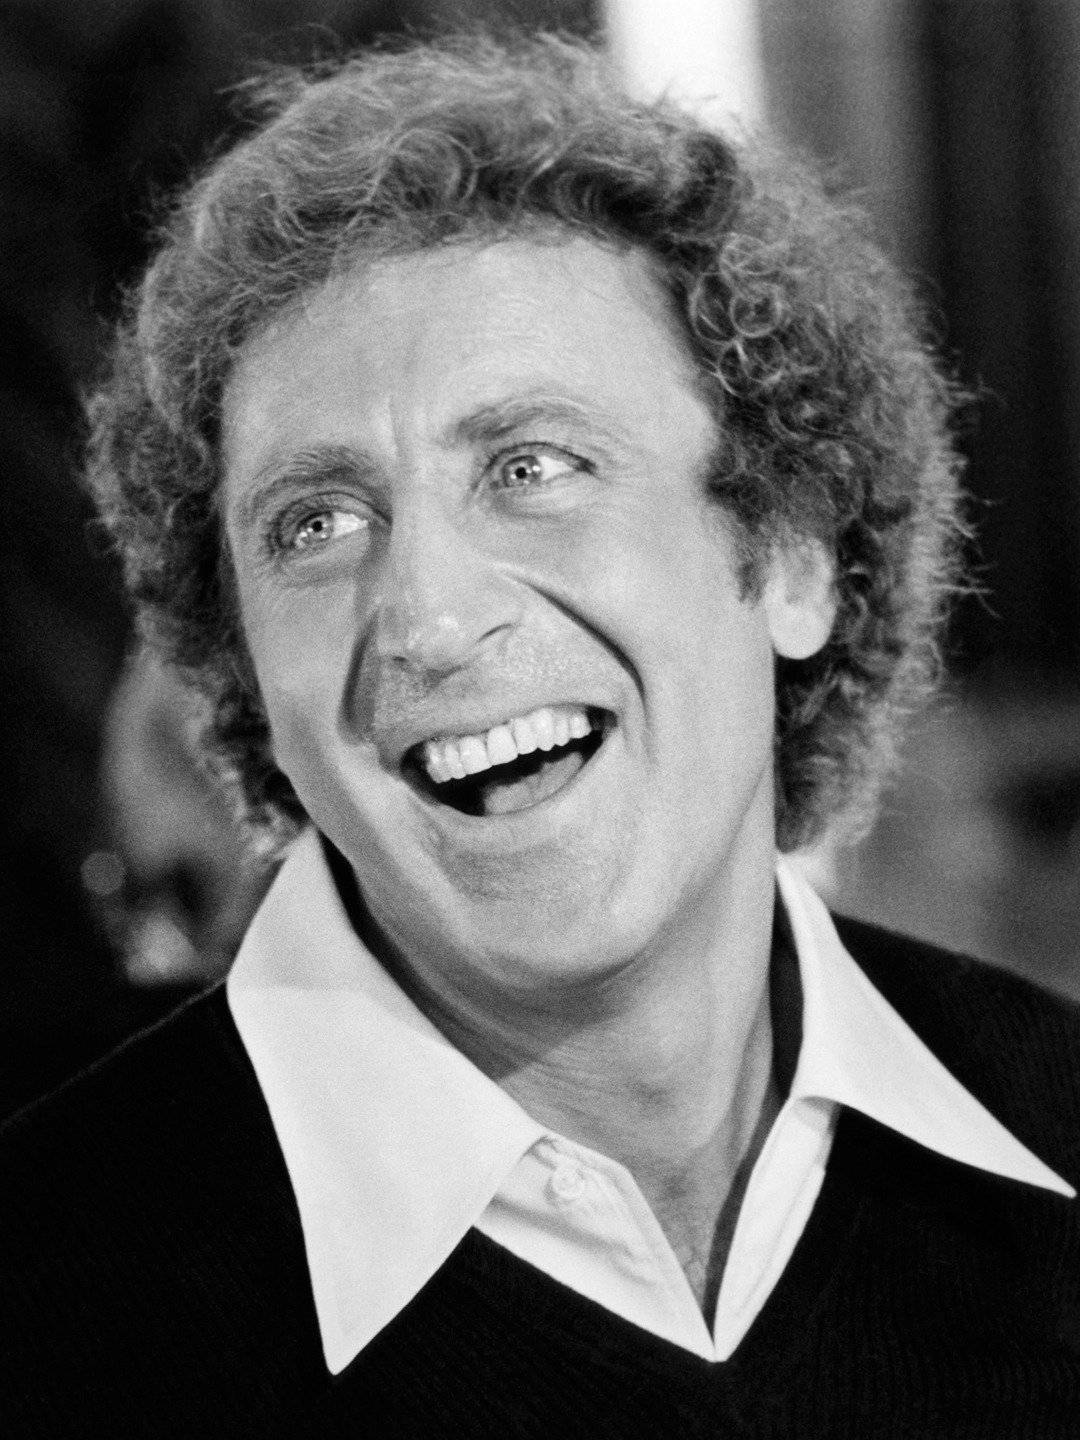 Amerikanskaskådespelaren Gene Wilder Young Frankenstein. (note: In This Context, There Is No Need To Translate 